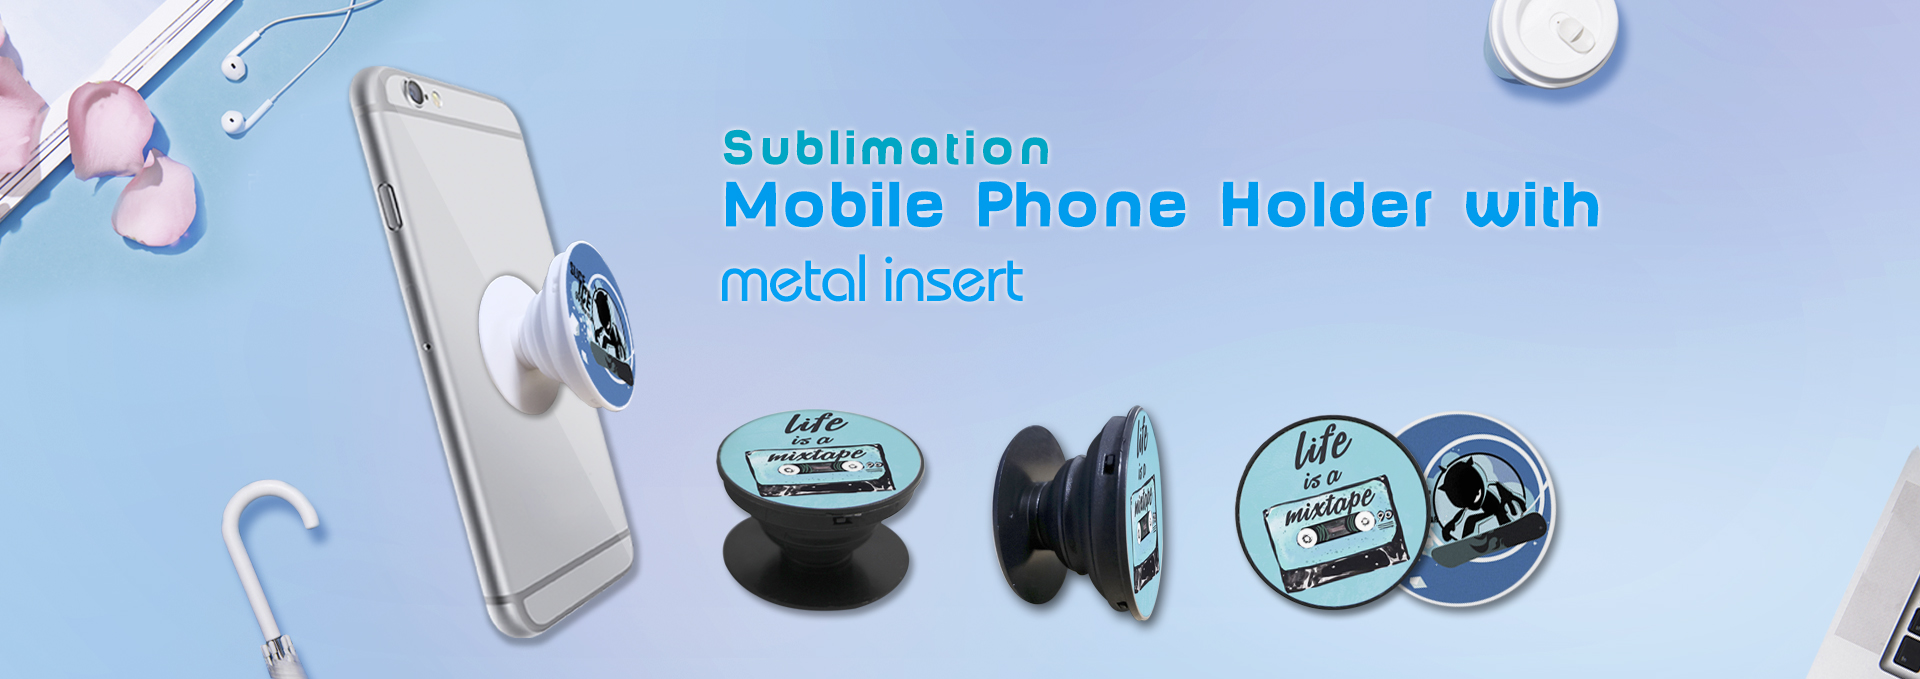 Sublimation Cell Phone Holder with metal insert